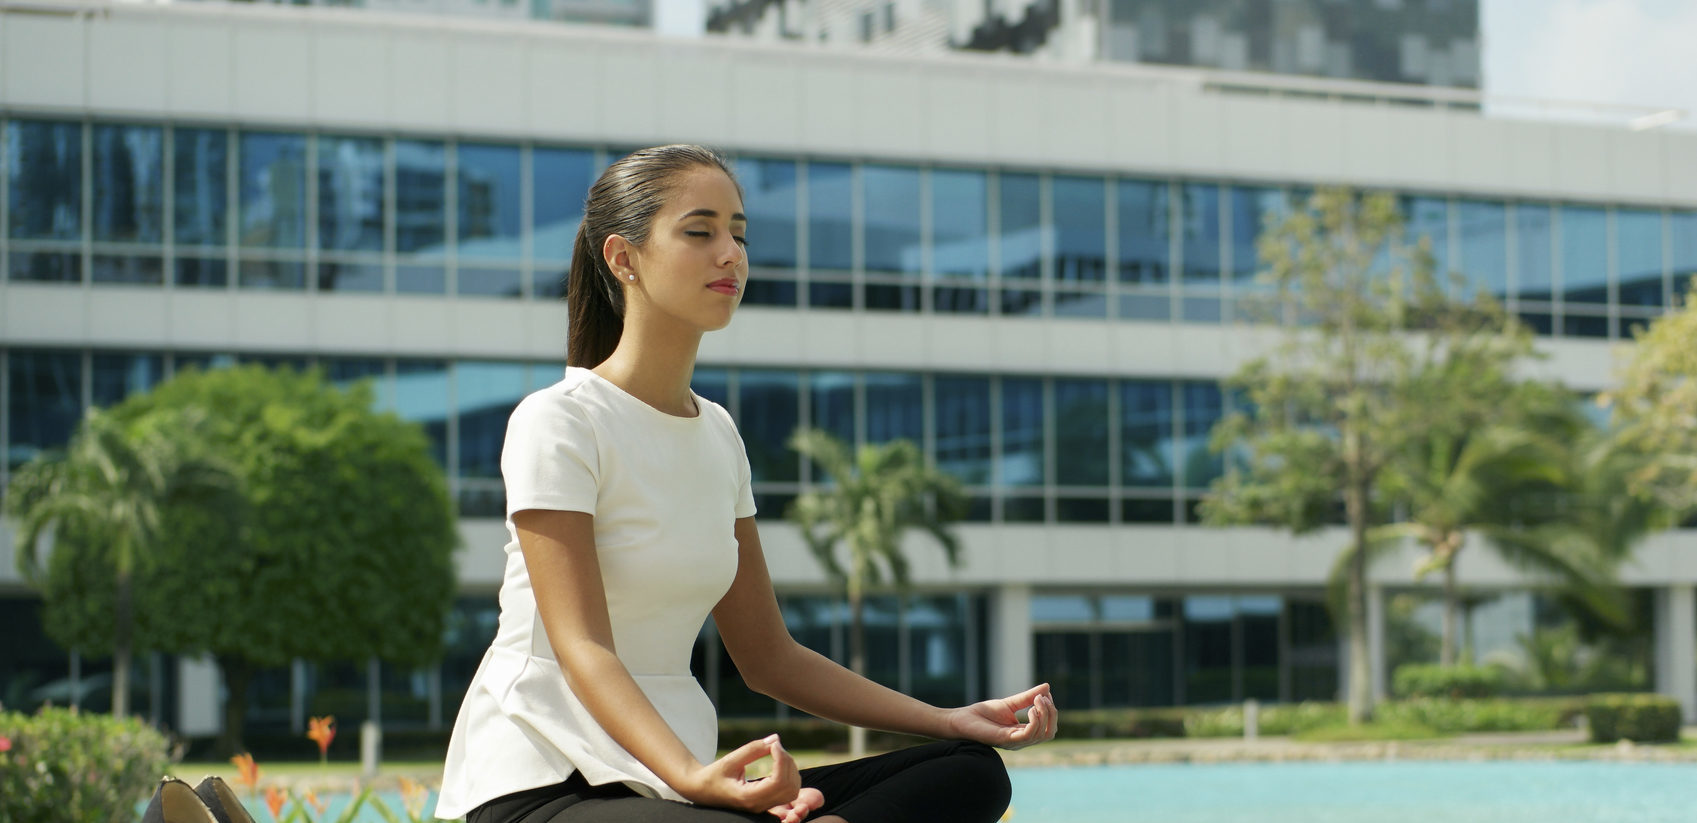 How do I find the best tips in meditation training? 5